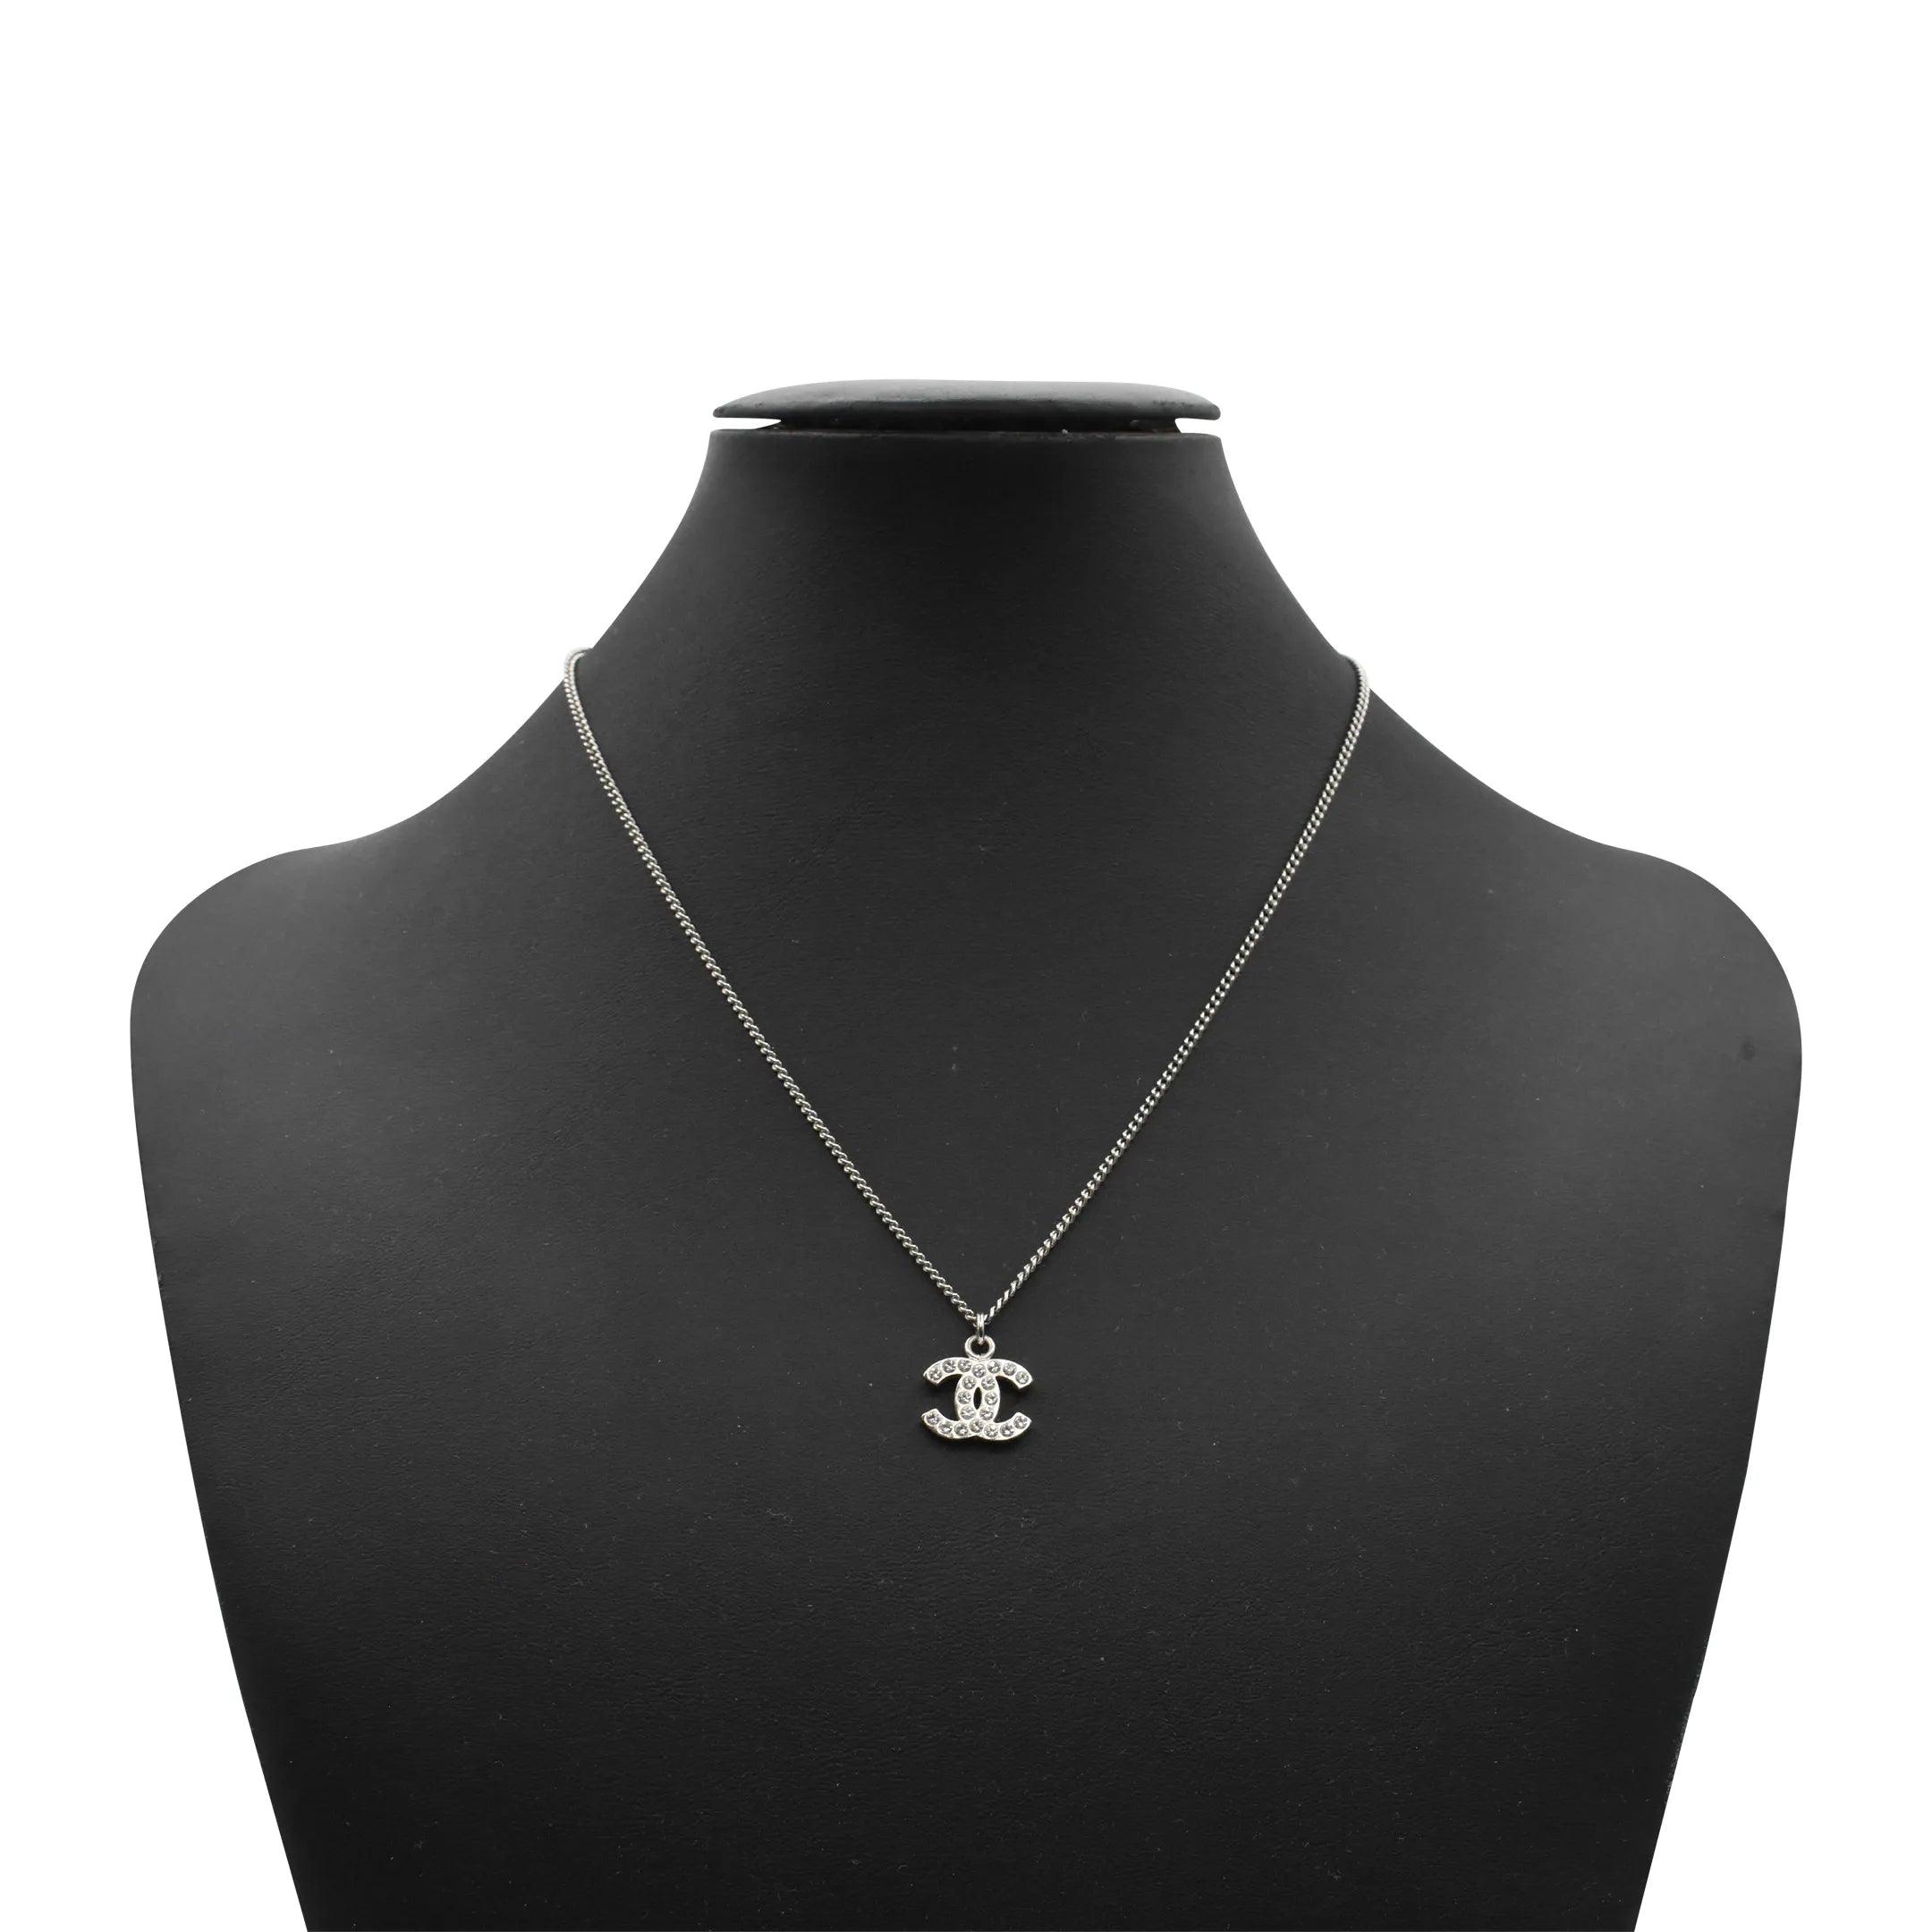 Chanel 'CC' Necklace - Fashionably Yours